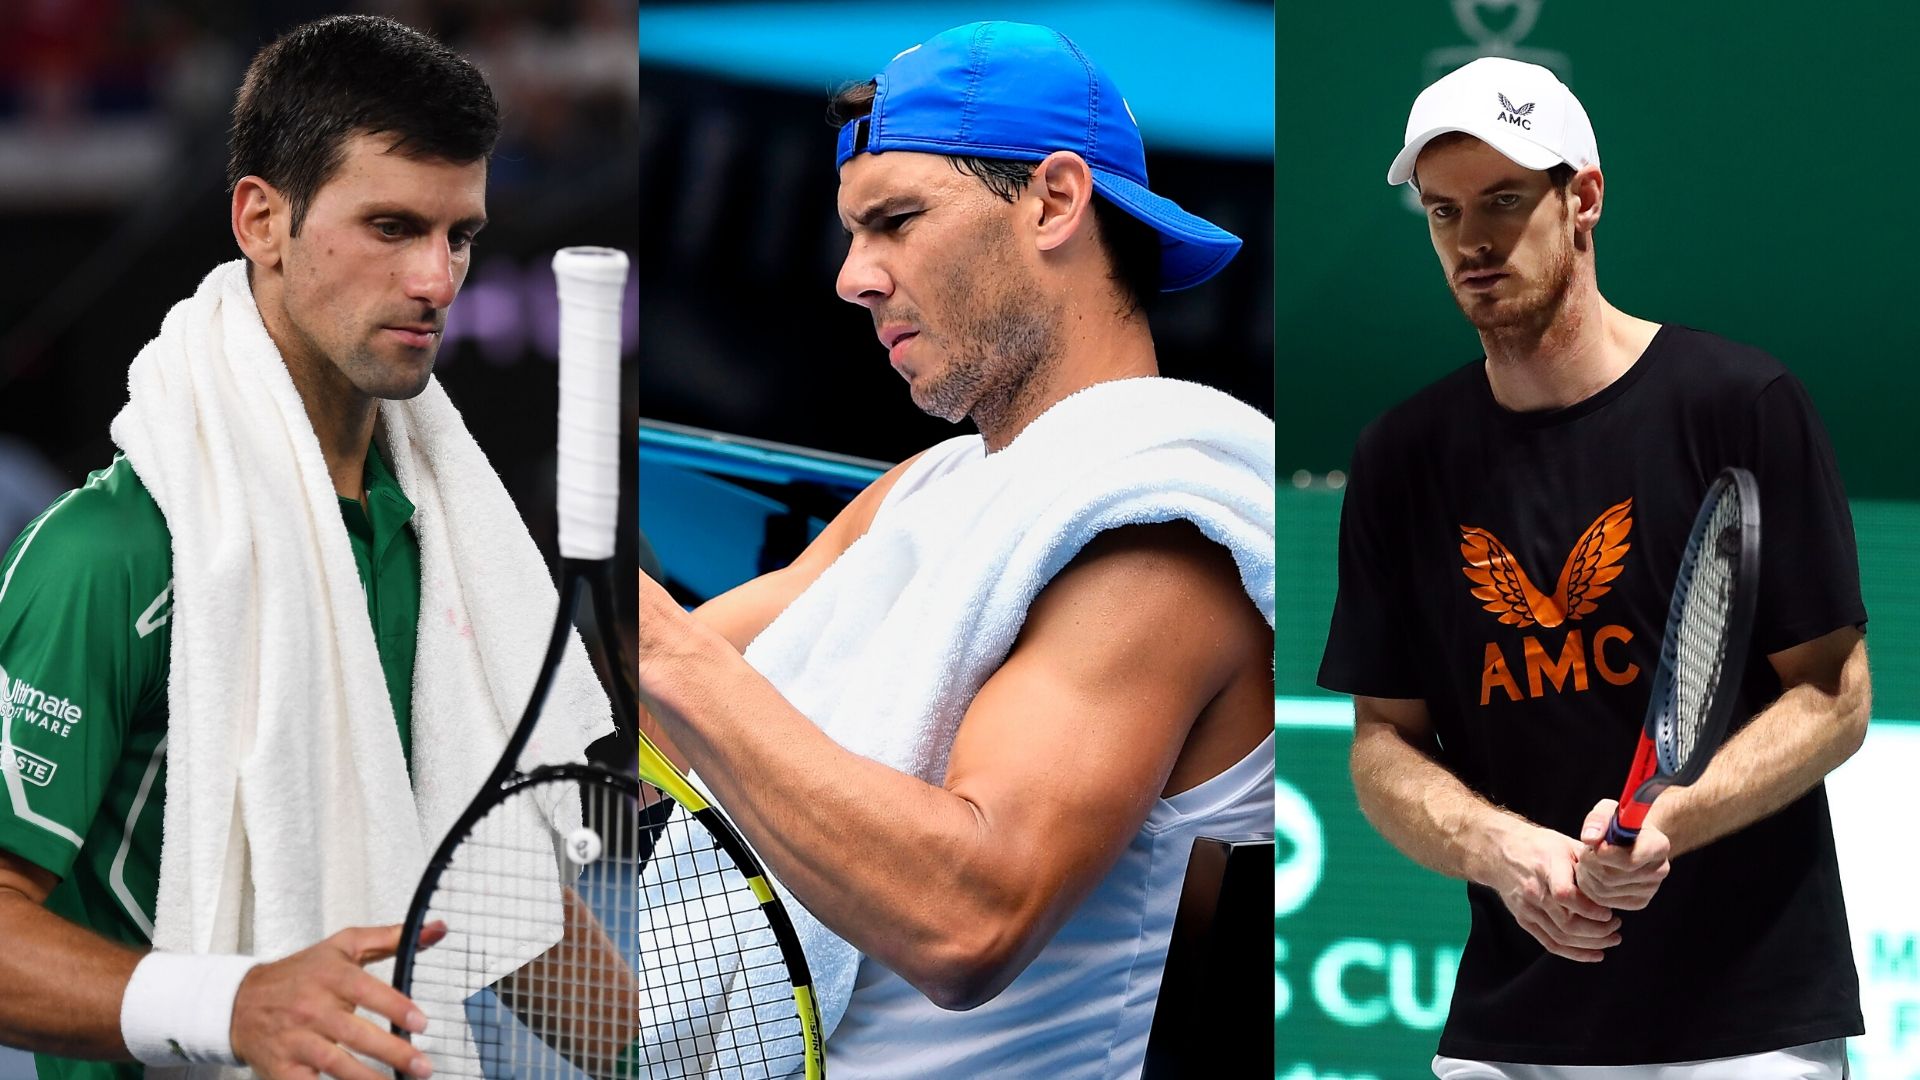 Rafael Nadal spoke about his rivals during an Instagram session